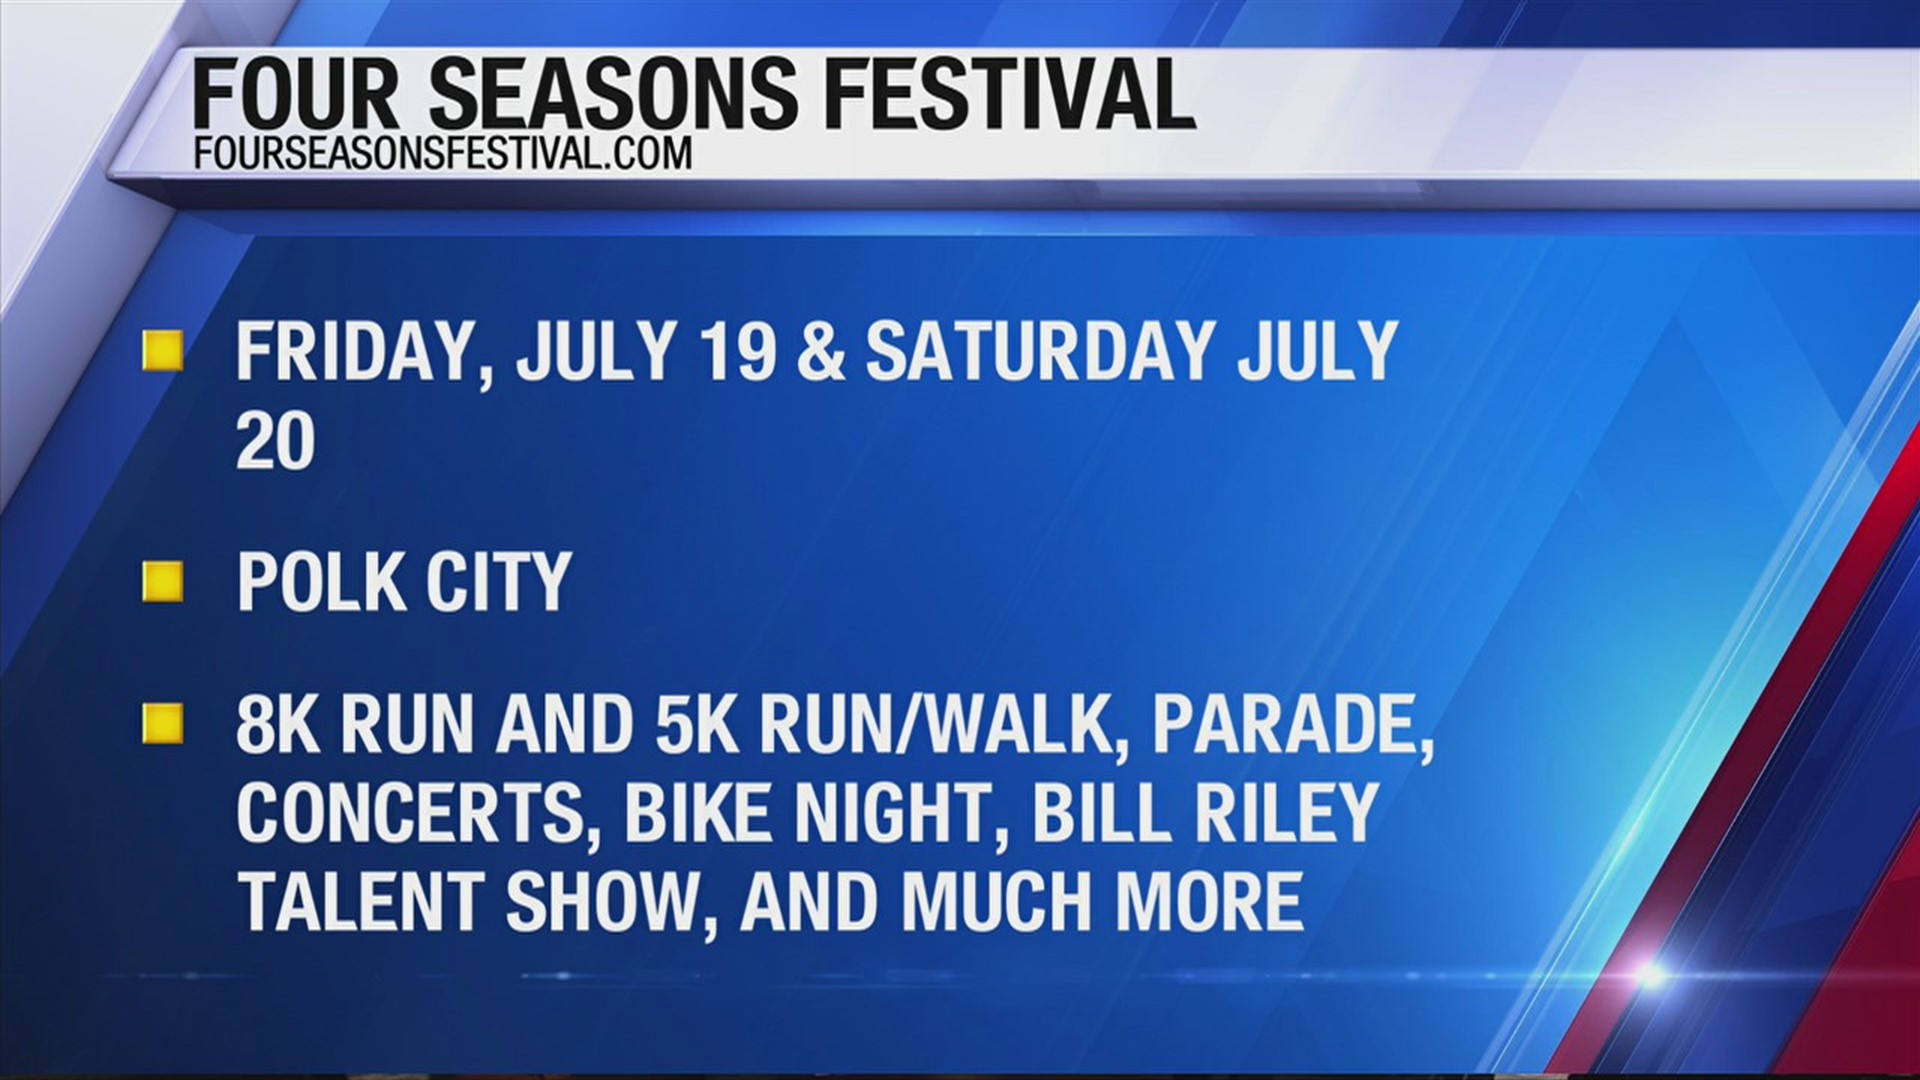 Annual Four Seasons Festival returns this weekend bigger and better